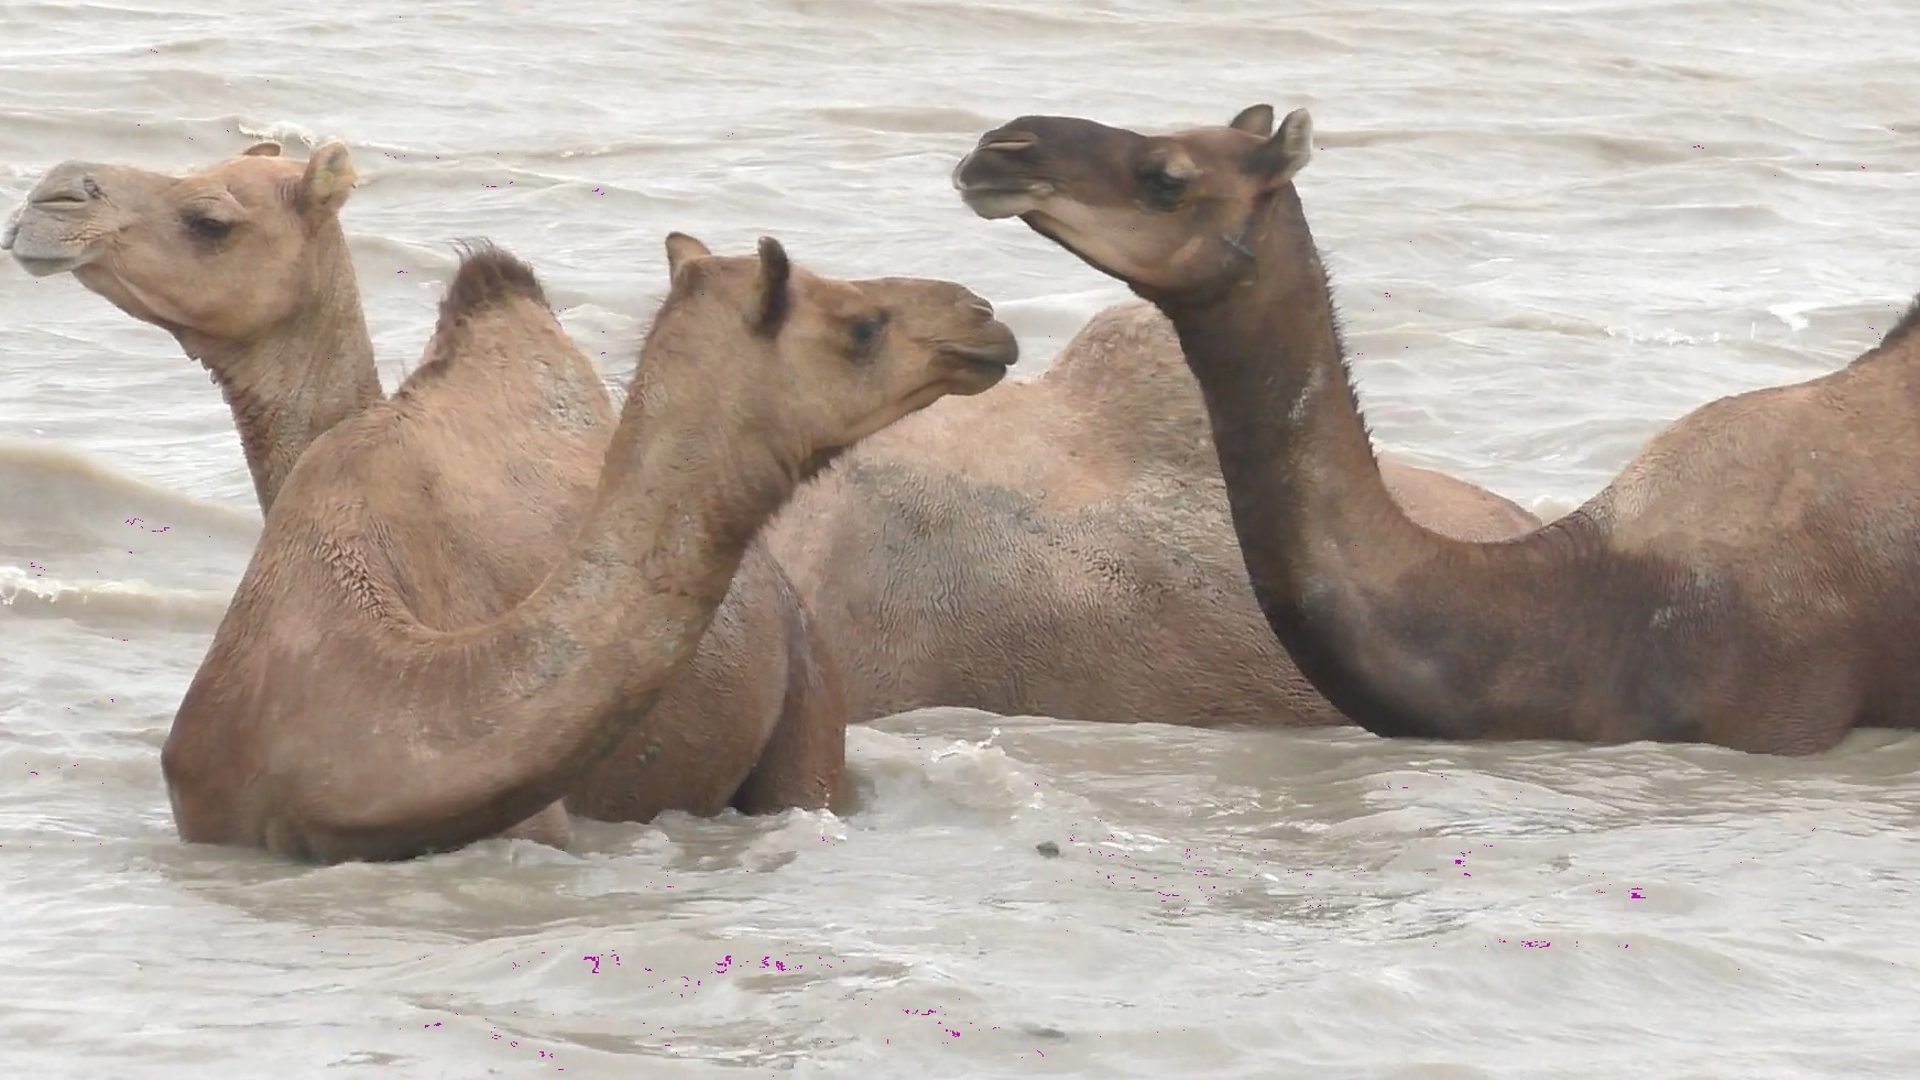 The rare Indian swimming camels under threat - BBC News